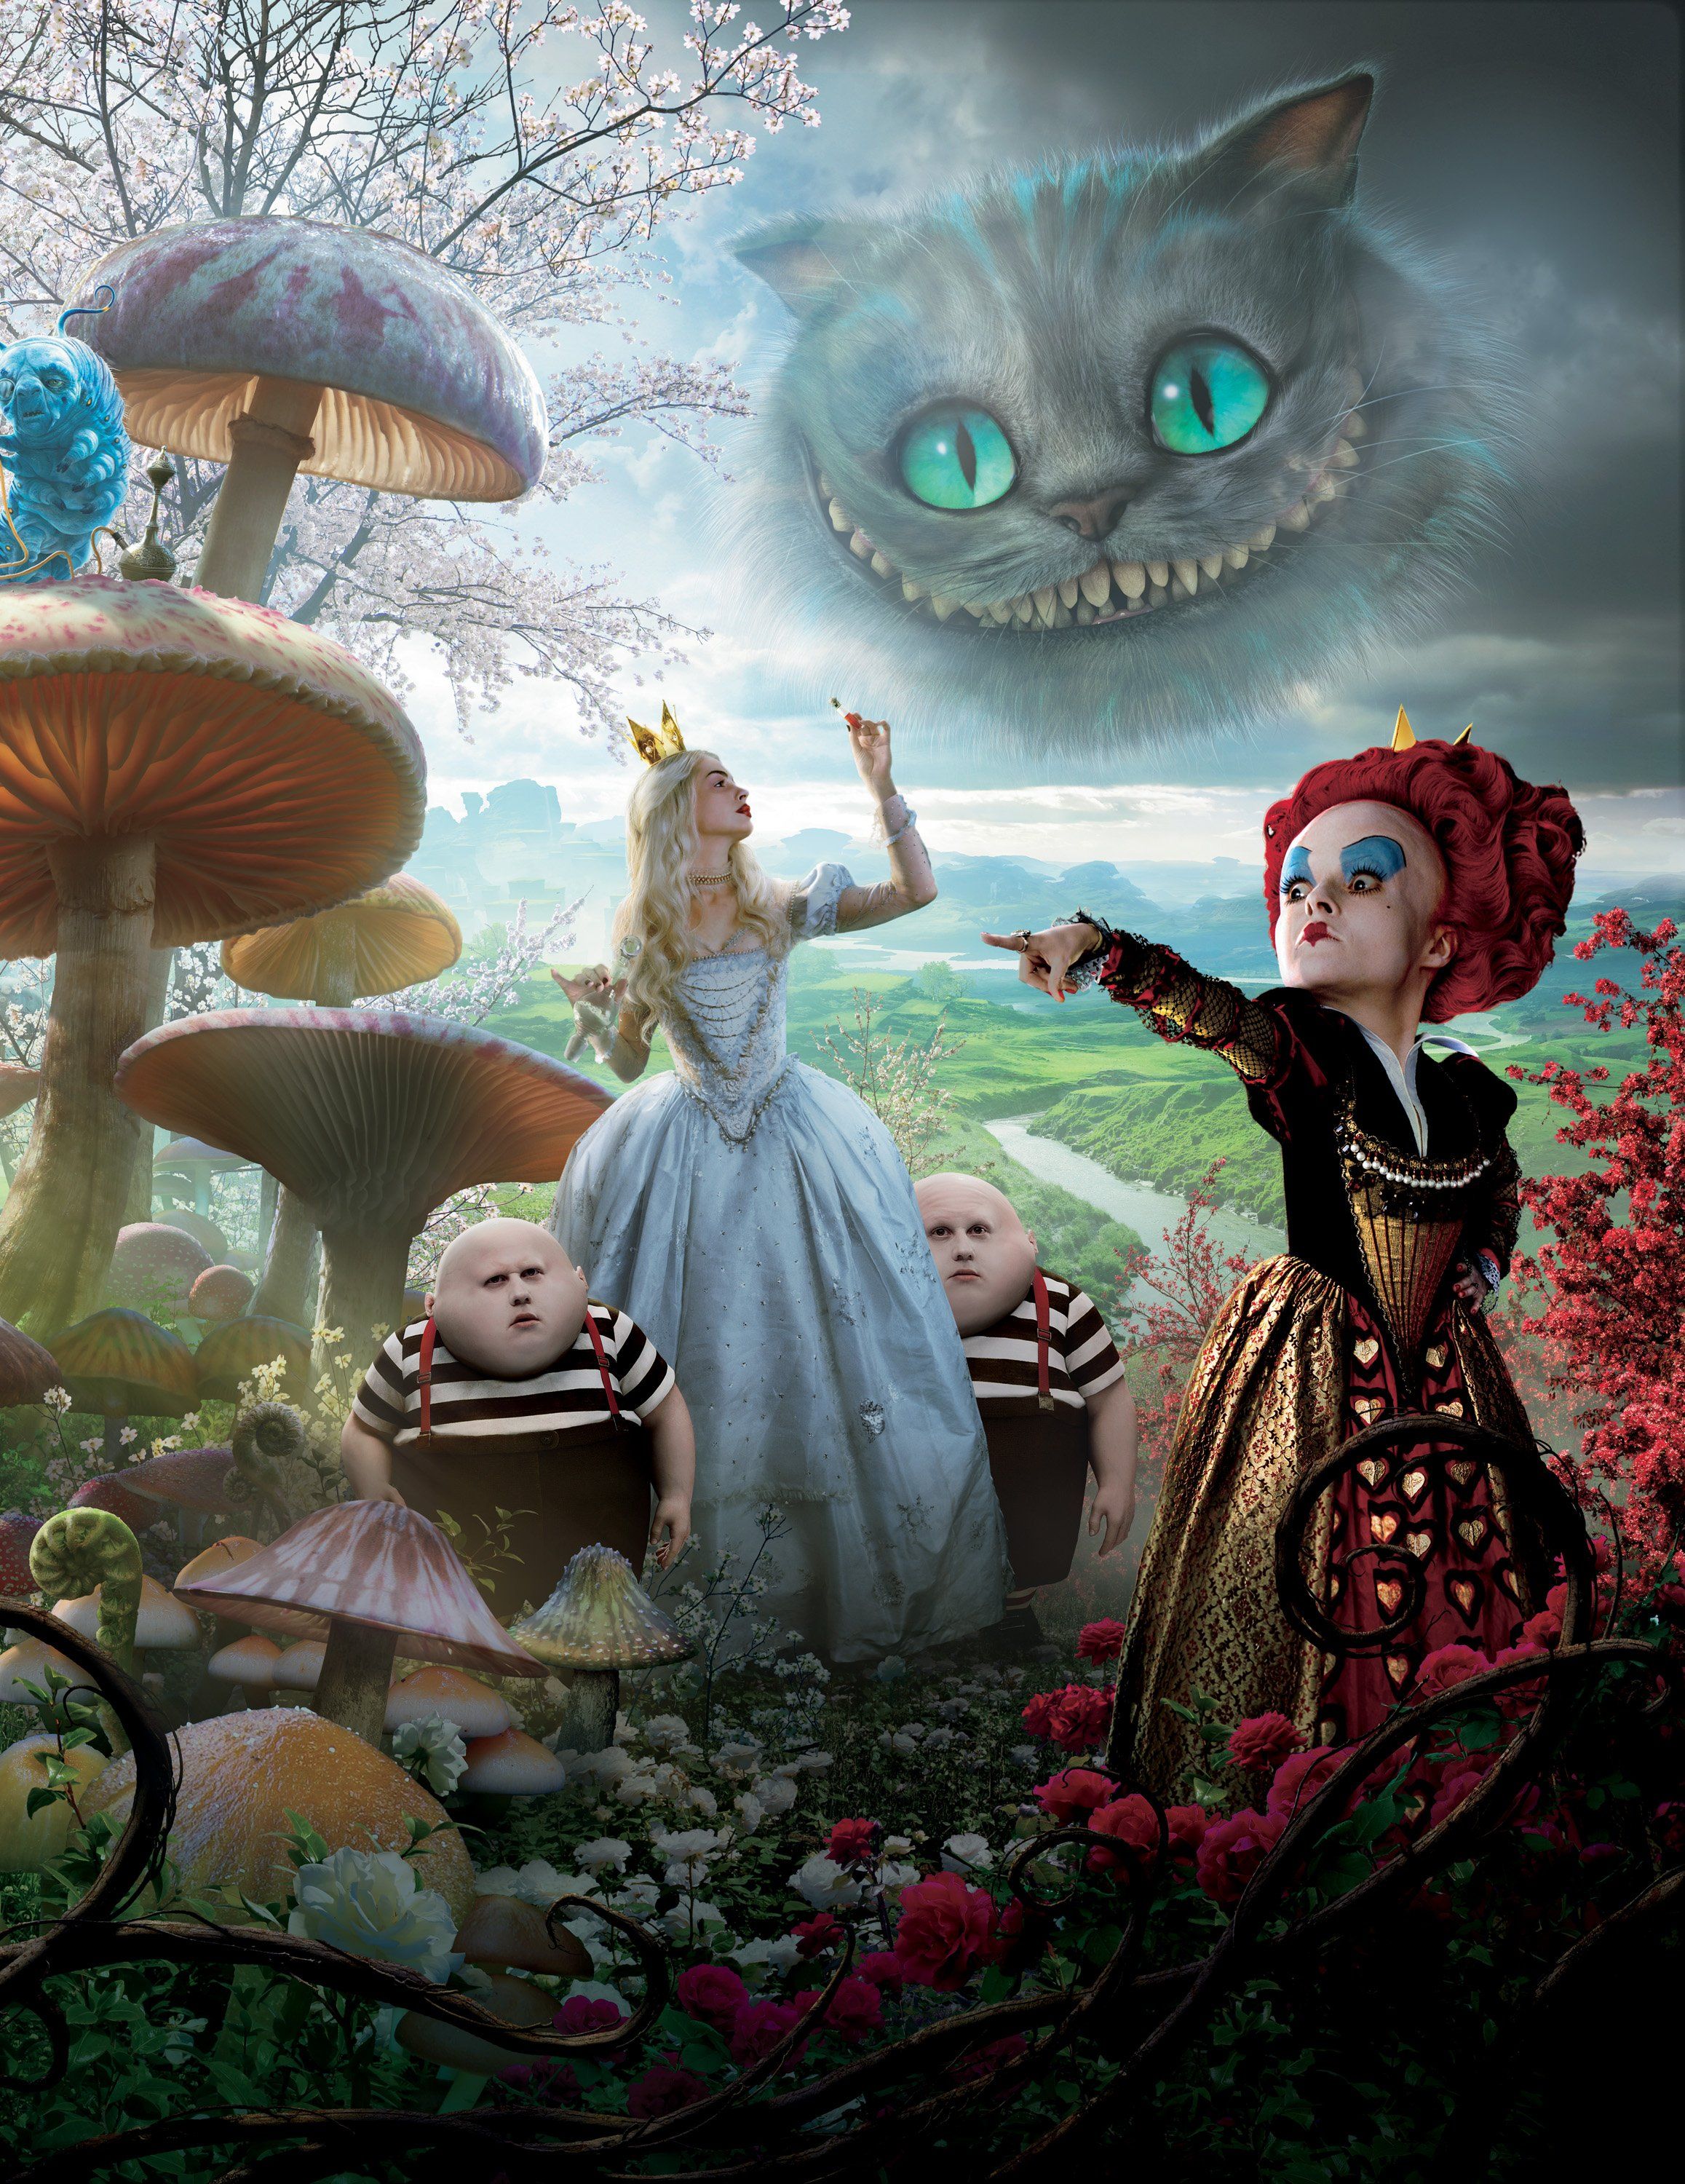 Alice in Wonderland 2010 Poster HD Wallpaper for iPhone 6